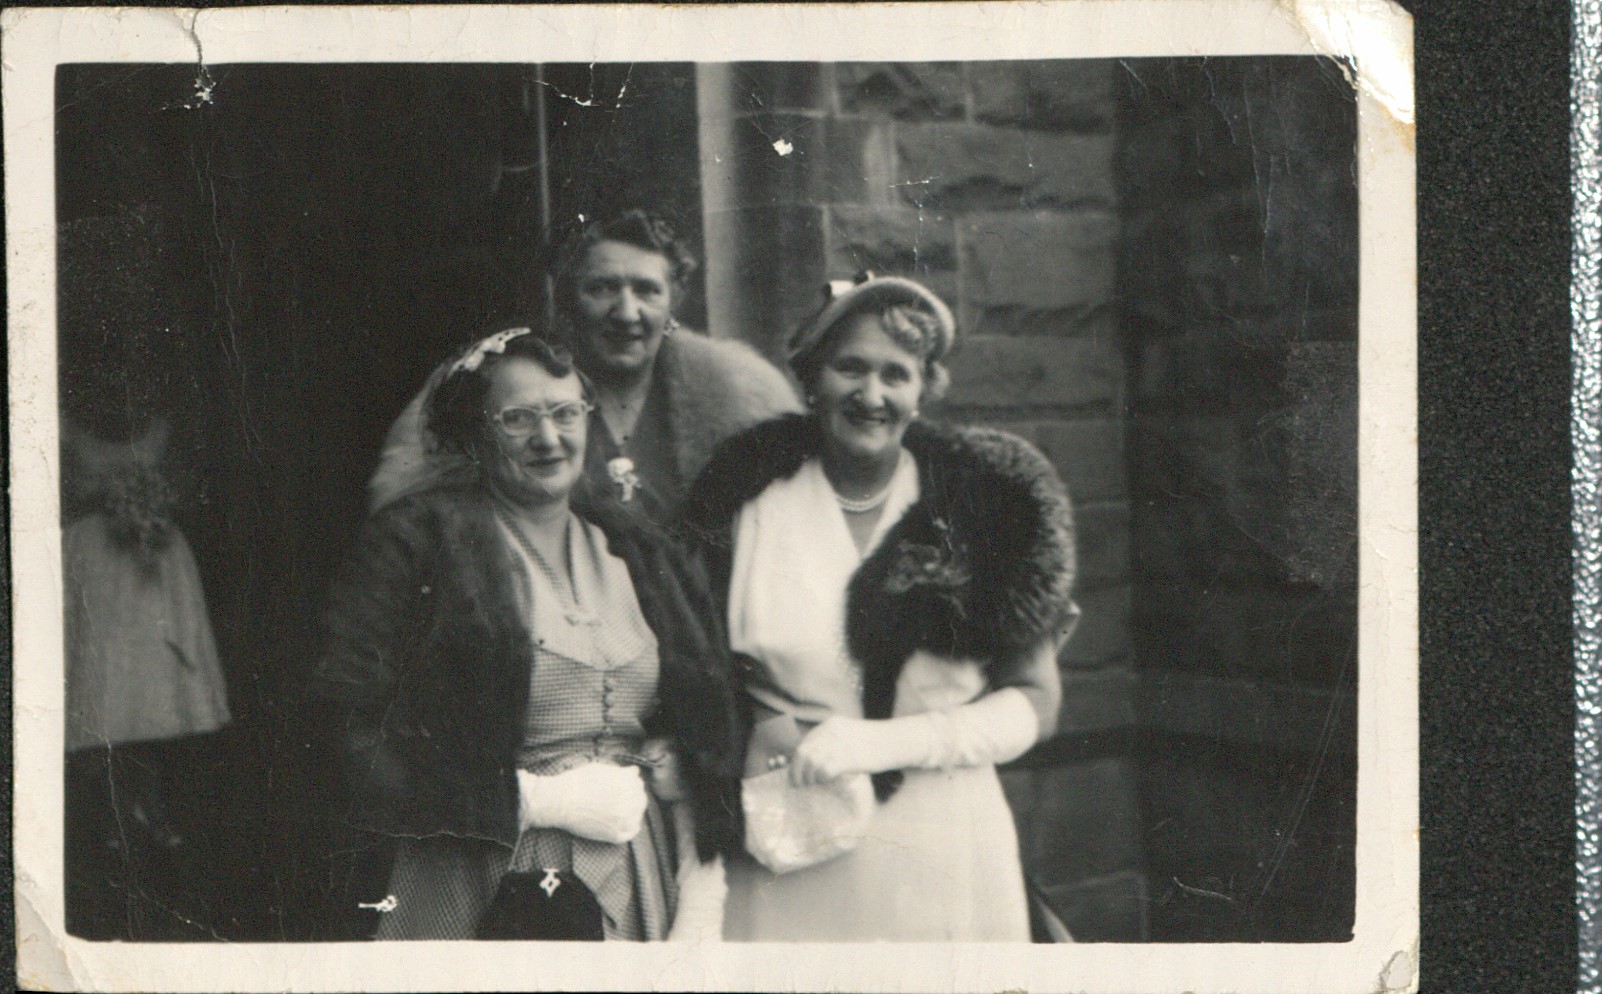 Image of the daughters of Benjamin Easter Johnson. Gertie Hamon, Ellie Hinton and Emma Hutton [LHRN5333]